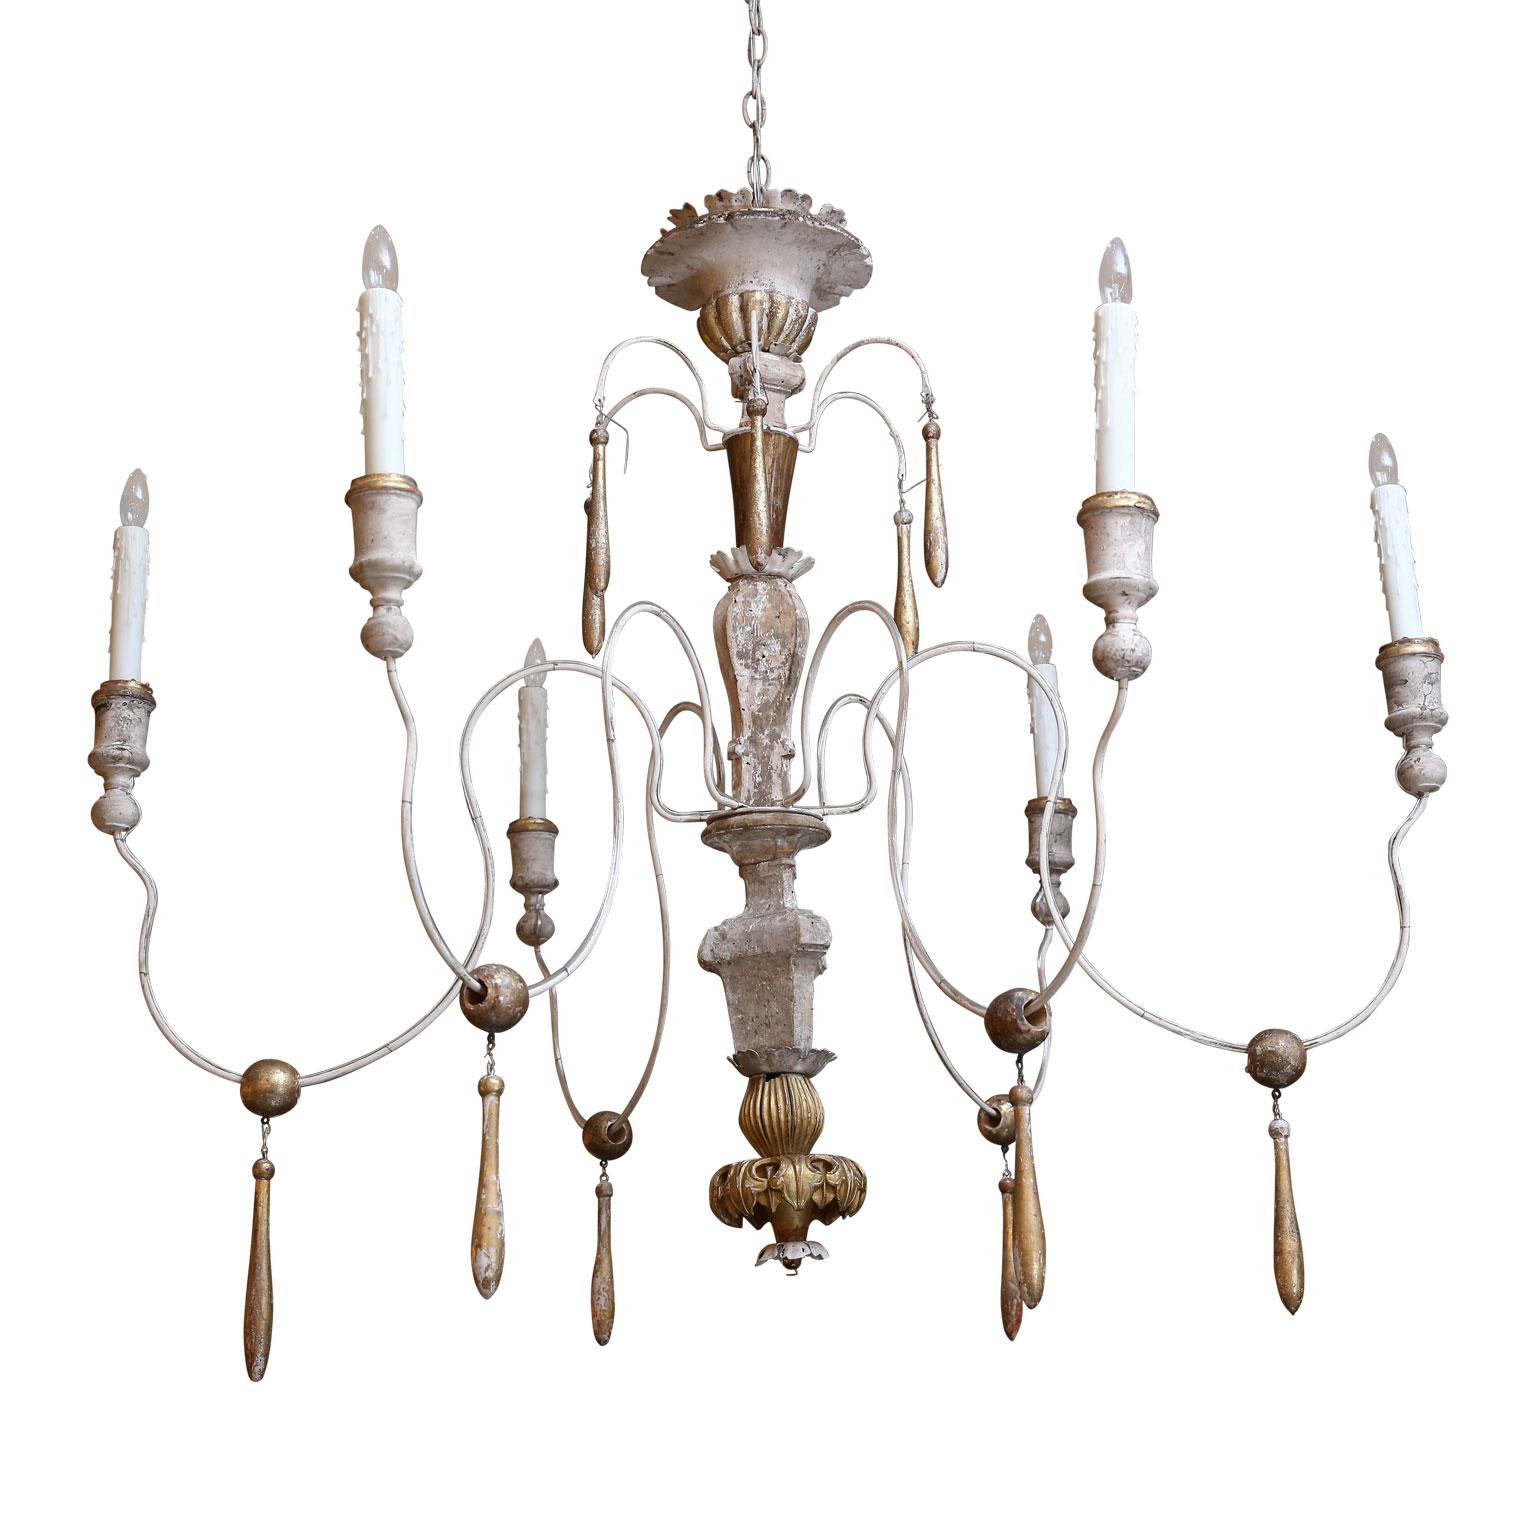 Large Italian chandelier from antique elements with six later iron arms. All wooden parts are hand carved 18th and 19th century fragments adorned with remnants of original gilt finish. Newly wired for use within the USA using all UL listed parts.